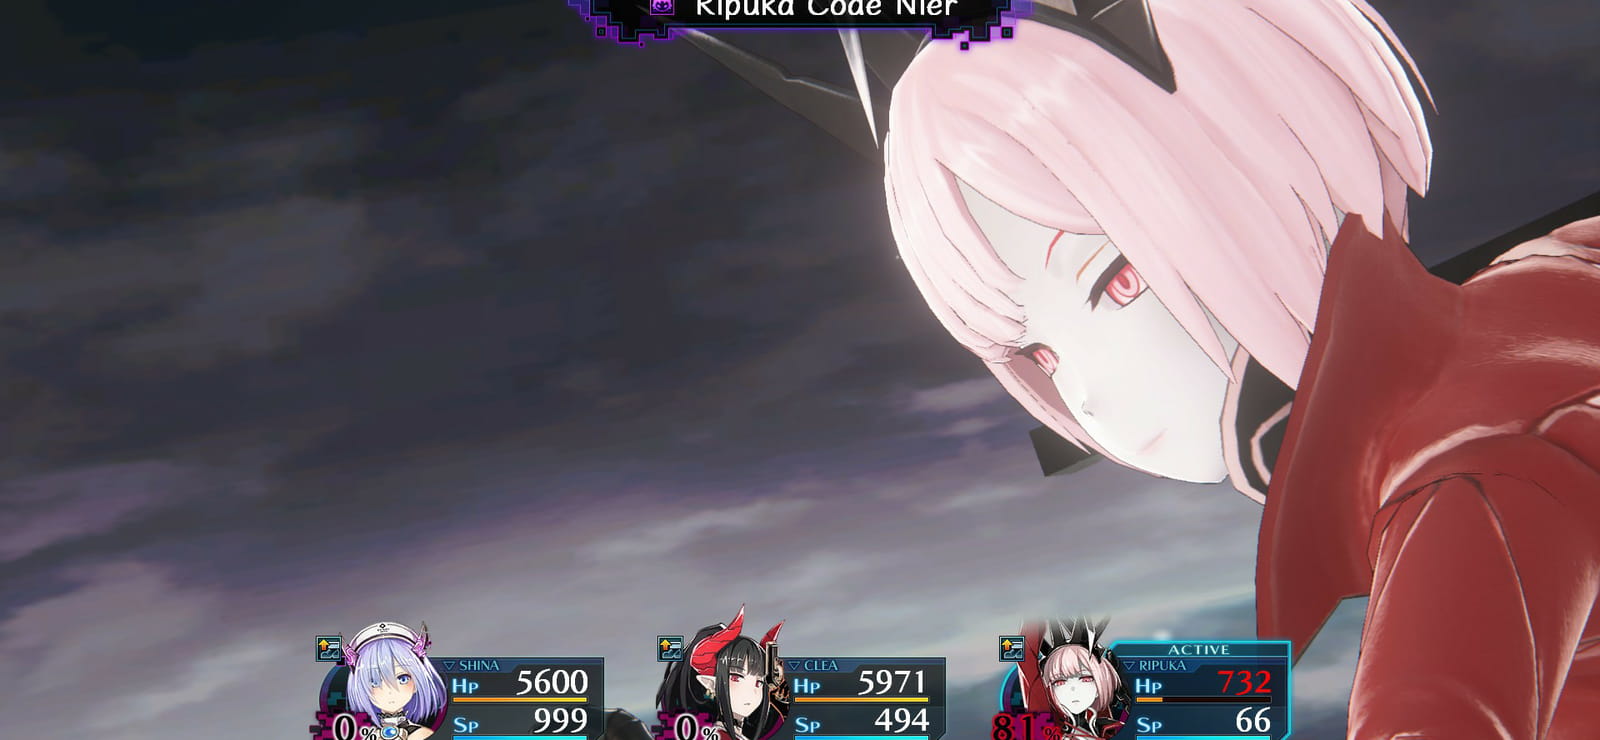 Death End Re;Quest - Additional Character: Ripuka